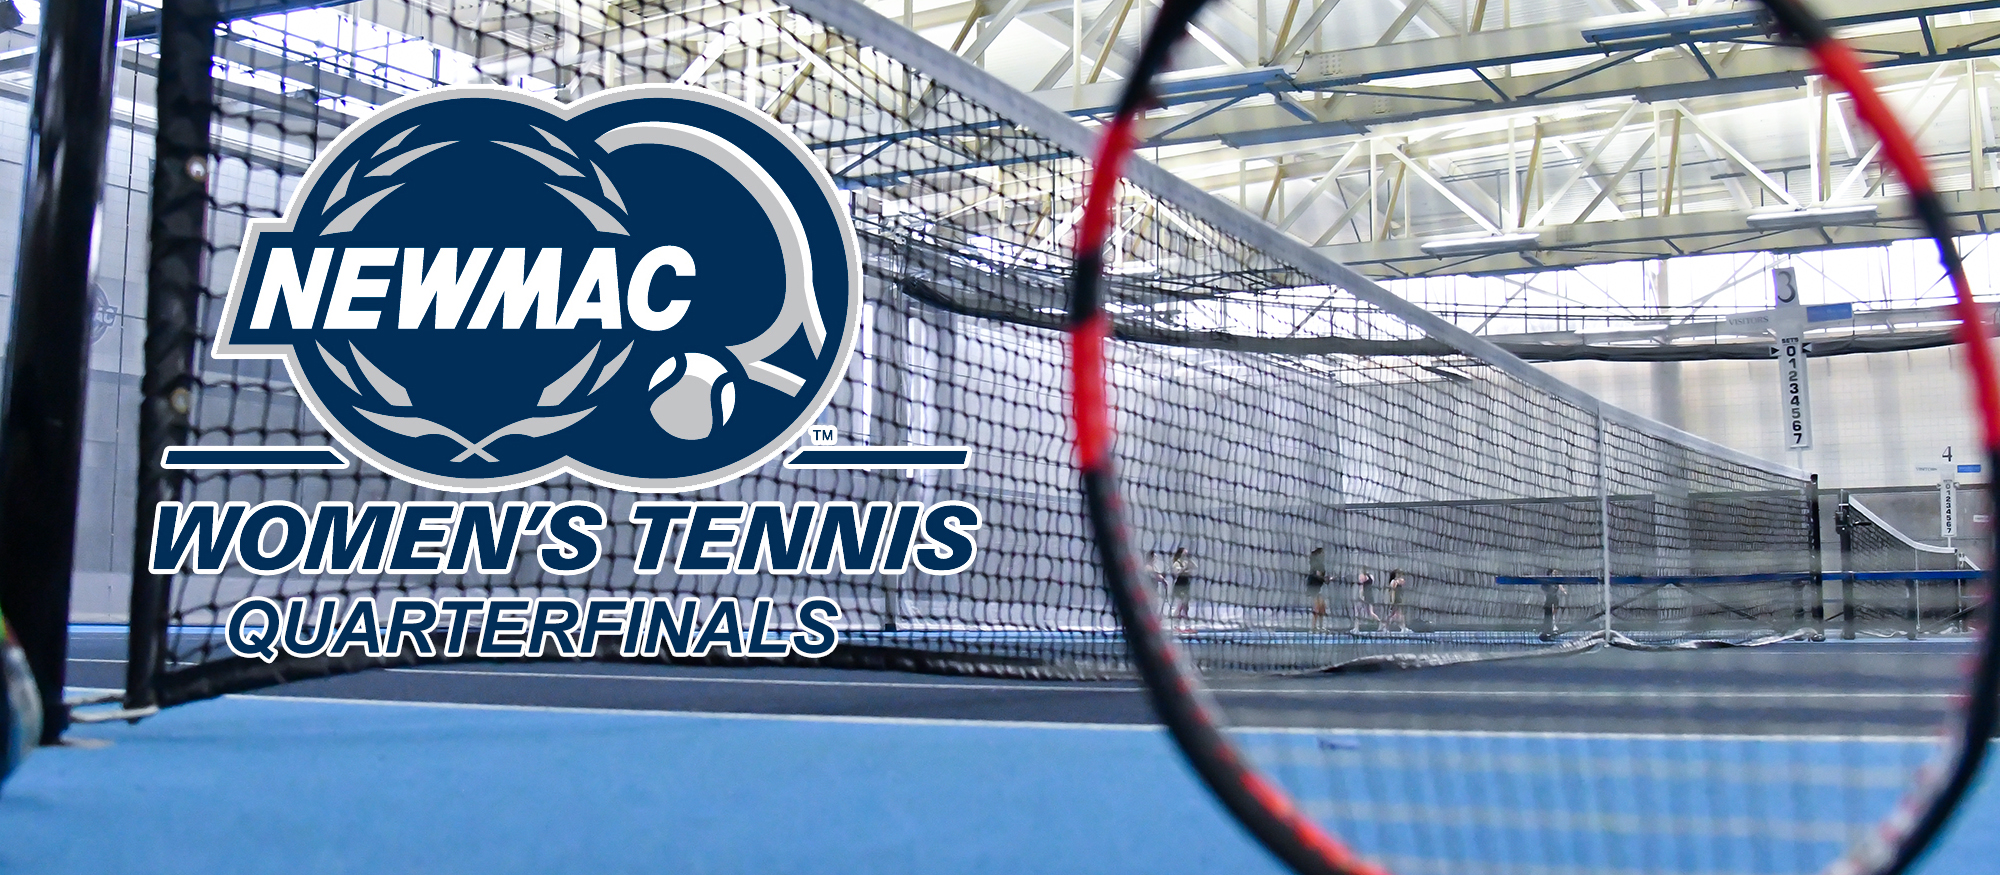 Image of a tennis net, court and racquet to promote the 2019 NEWMAC Tennis Quarterfinal match.